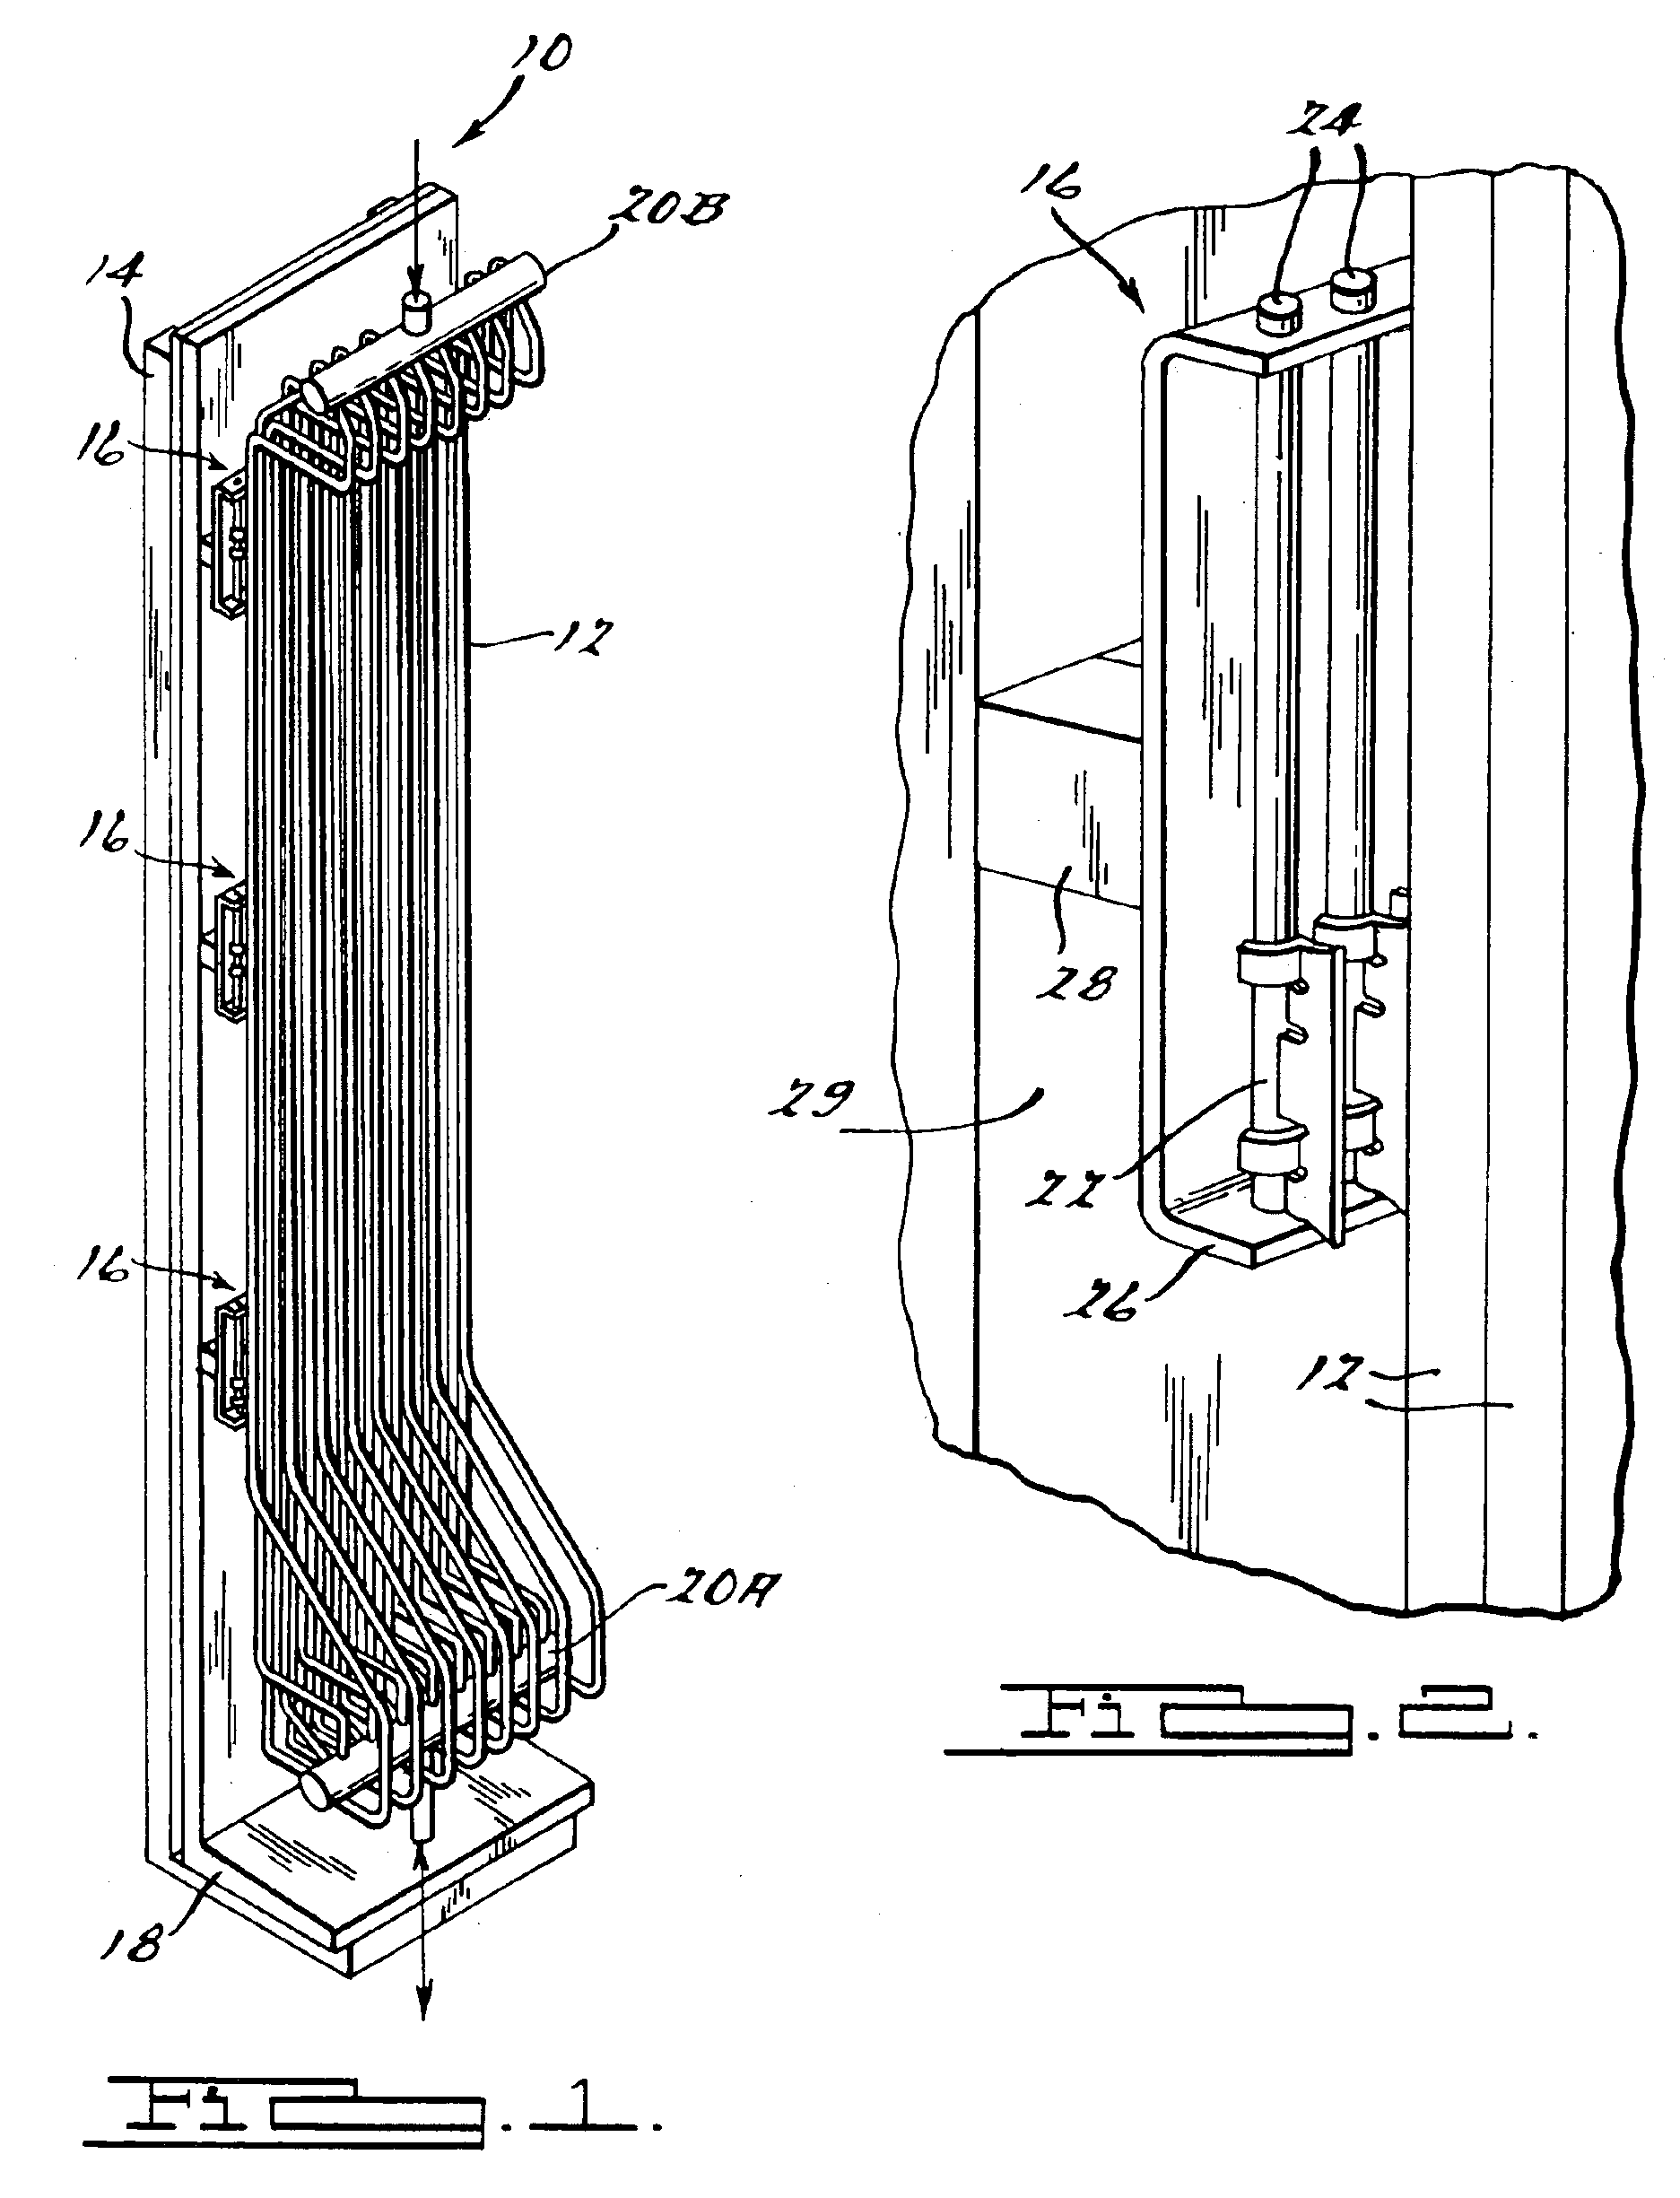 Bottom supported solar receiver panel apparatus and method